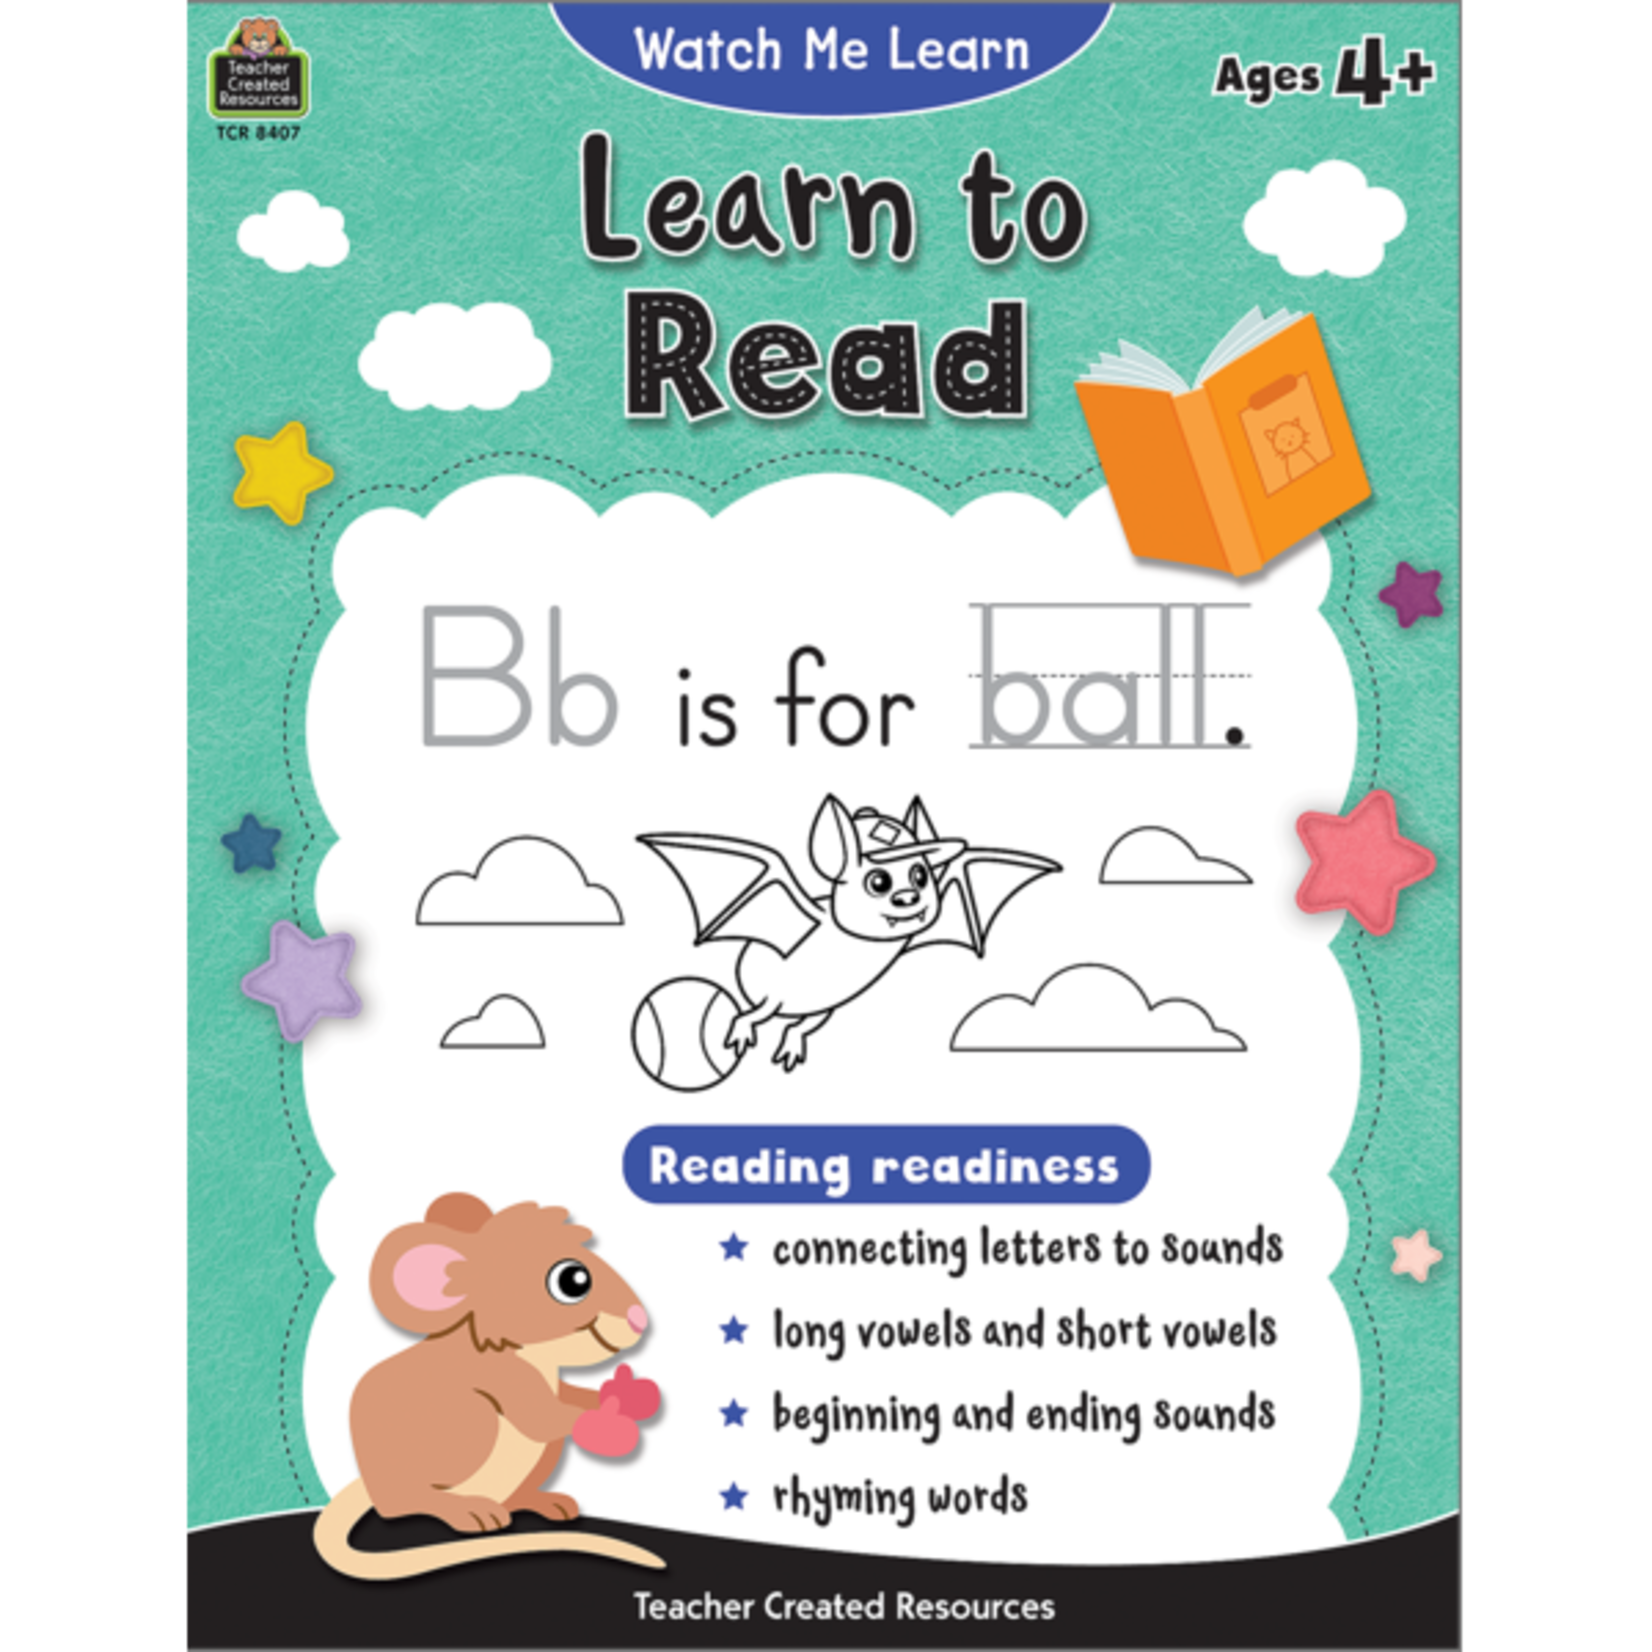 TEACHER CREATED RESOURCES Watch Me Learn: Learn to Read